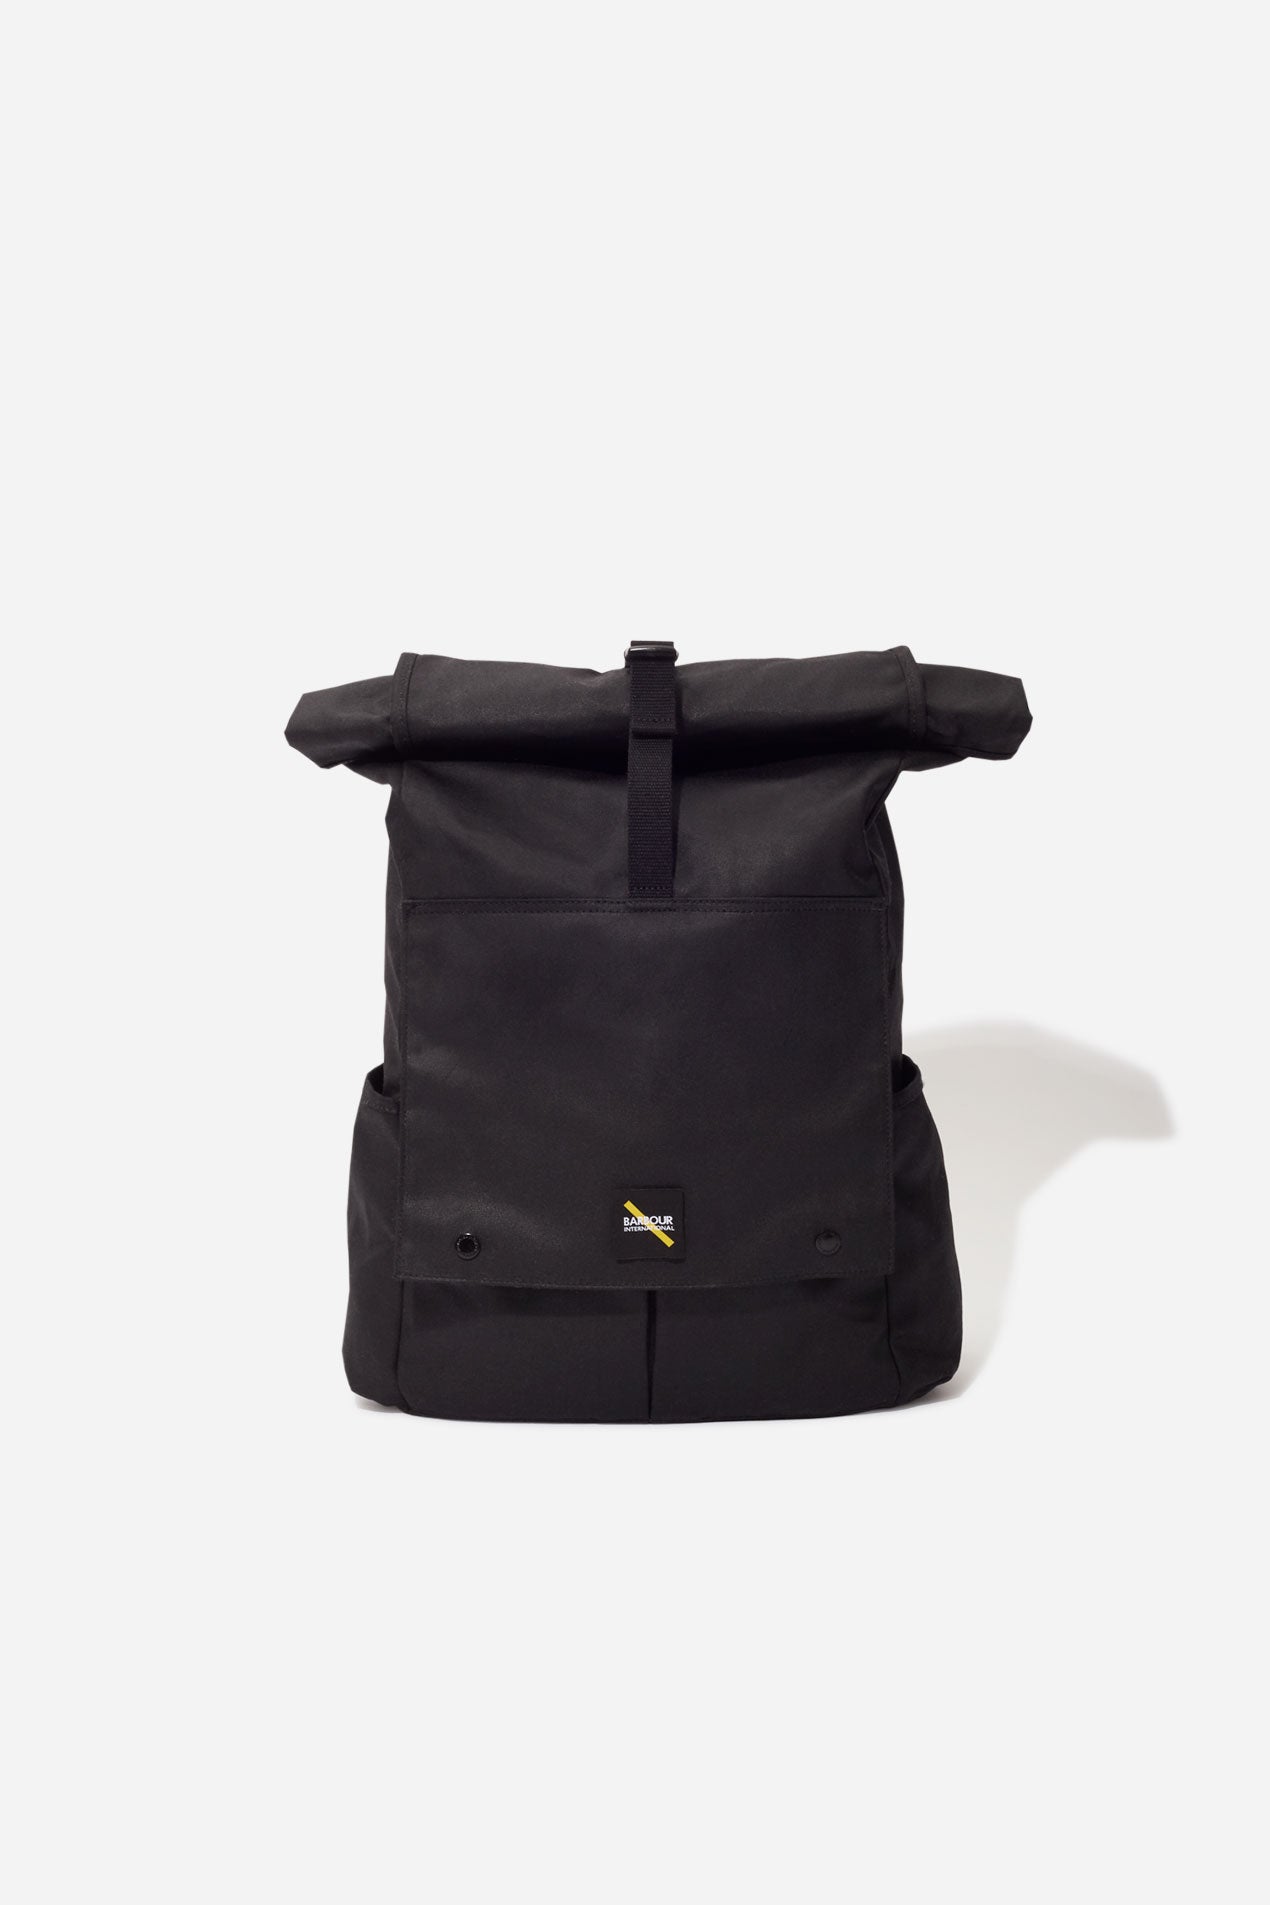 barbour urban backpack